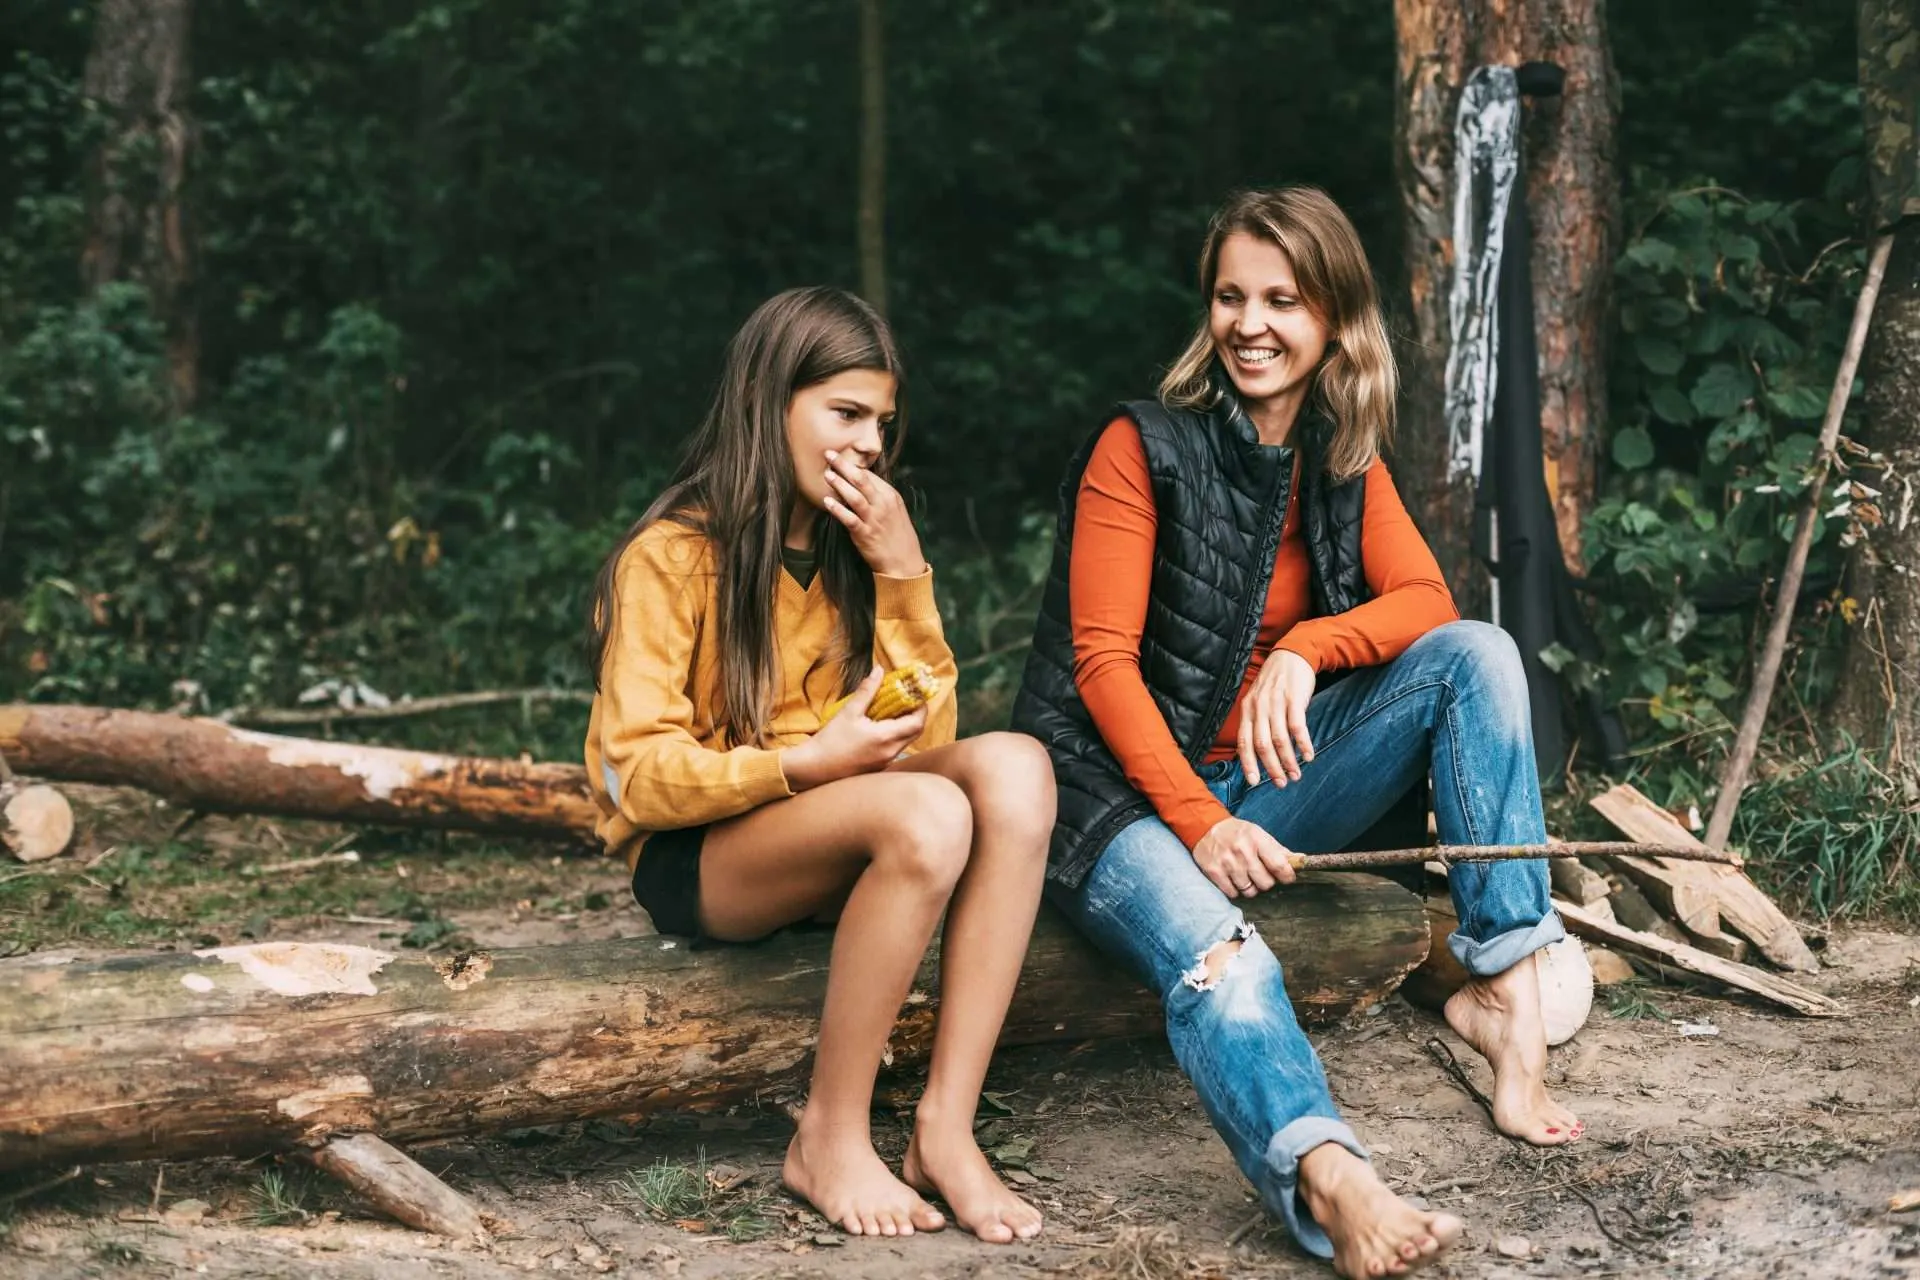 Mom and daughter eating food together on camping trip while learning survival skills